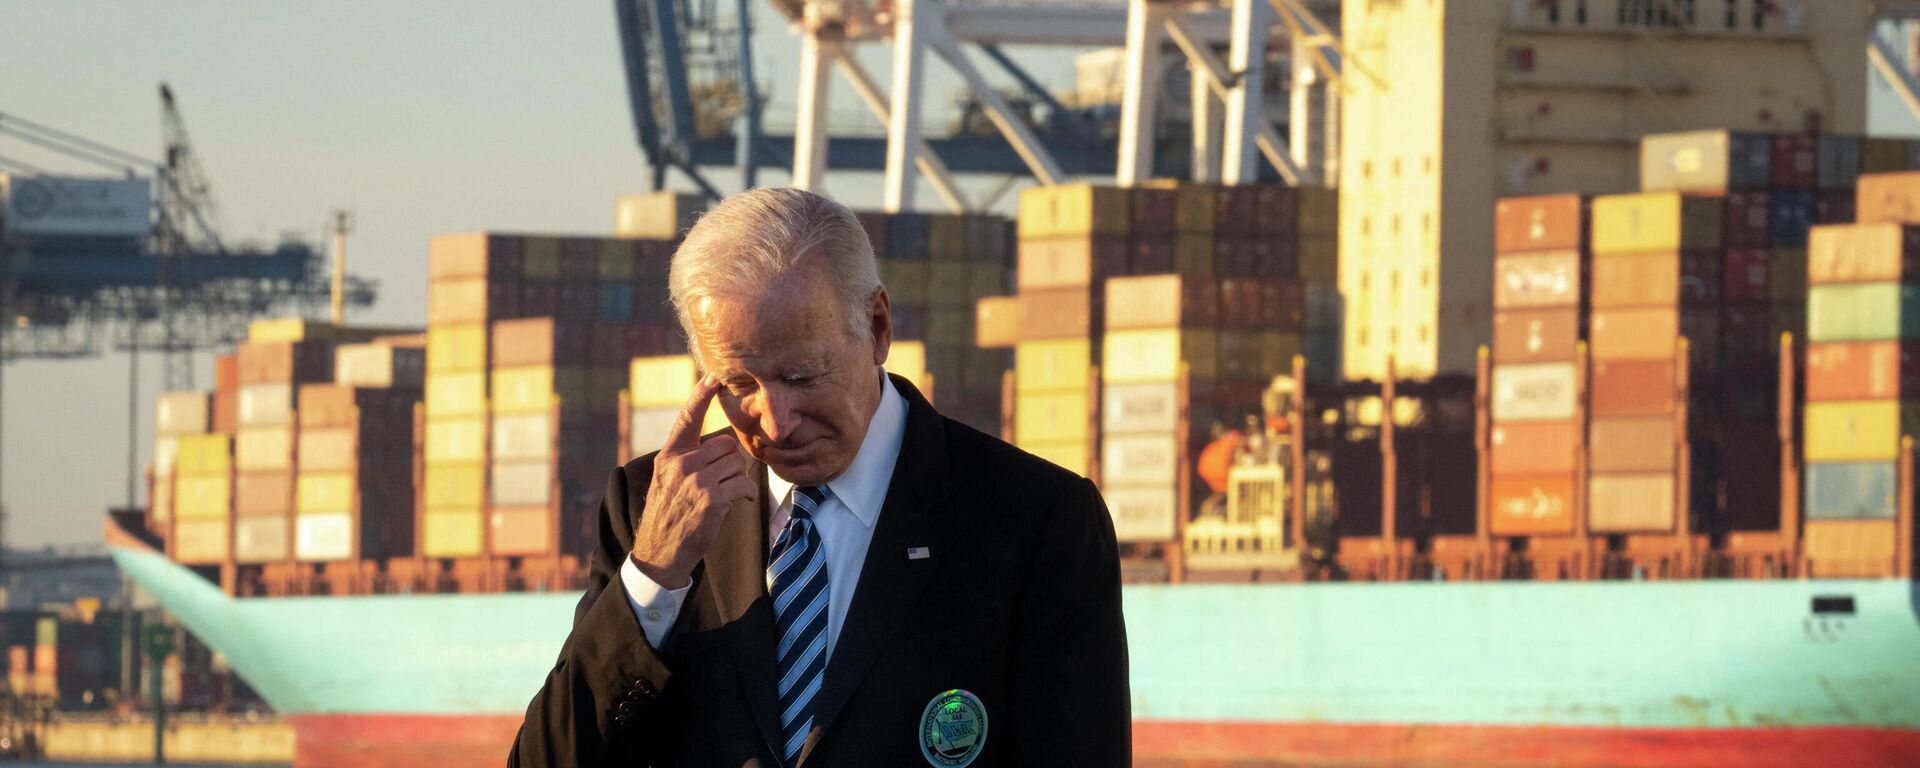 BALTIMORE, MD - NOVEMBER 10: U.S. President Joe Biden waits to speak about the recently passed $1.2 trillion Infrastructure Investment and Jobs Act at the Port of Baltimore on November 10, 2021 in Baltimore, Maryland - Sputnik International, 1920, 11.11.2021